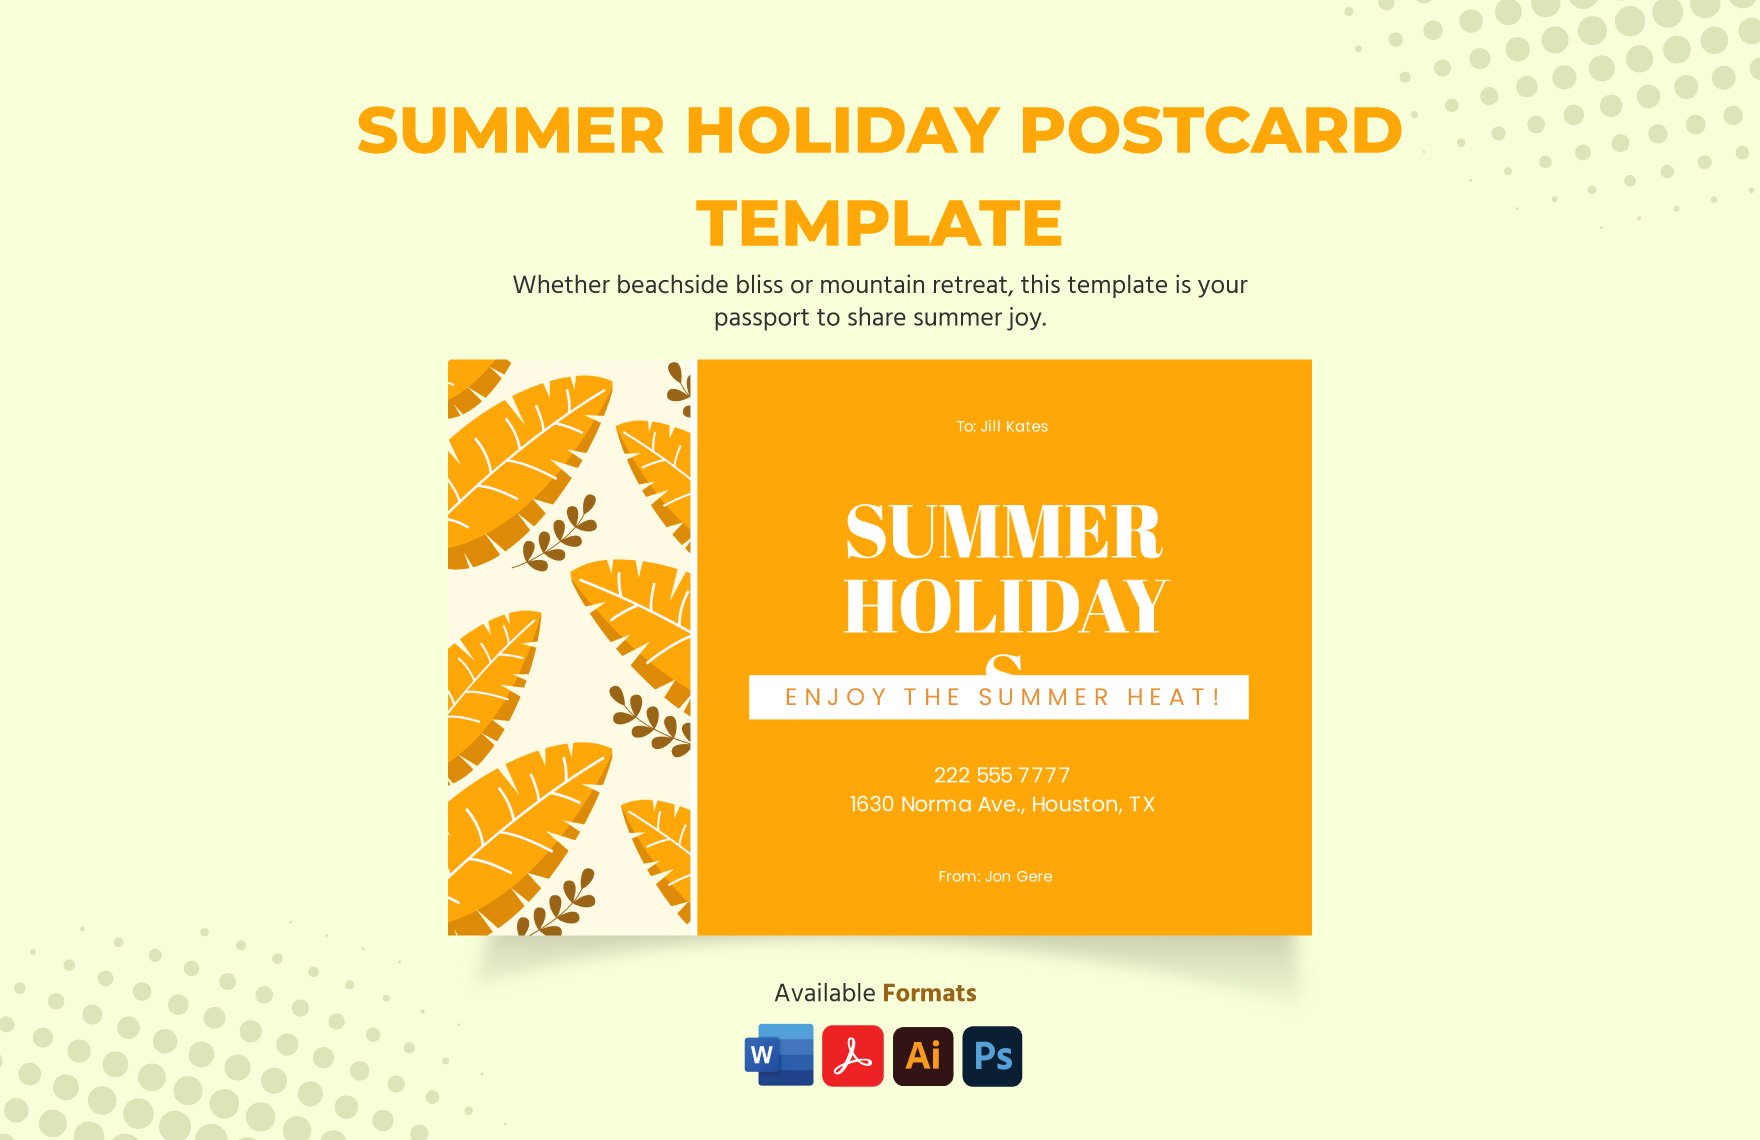 Summer Holiday Postcard Template in Word, PDF, Illustrator, PSD